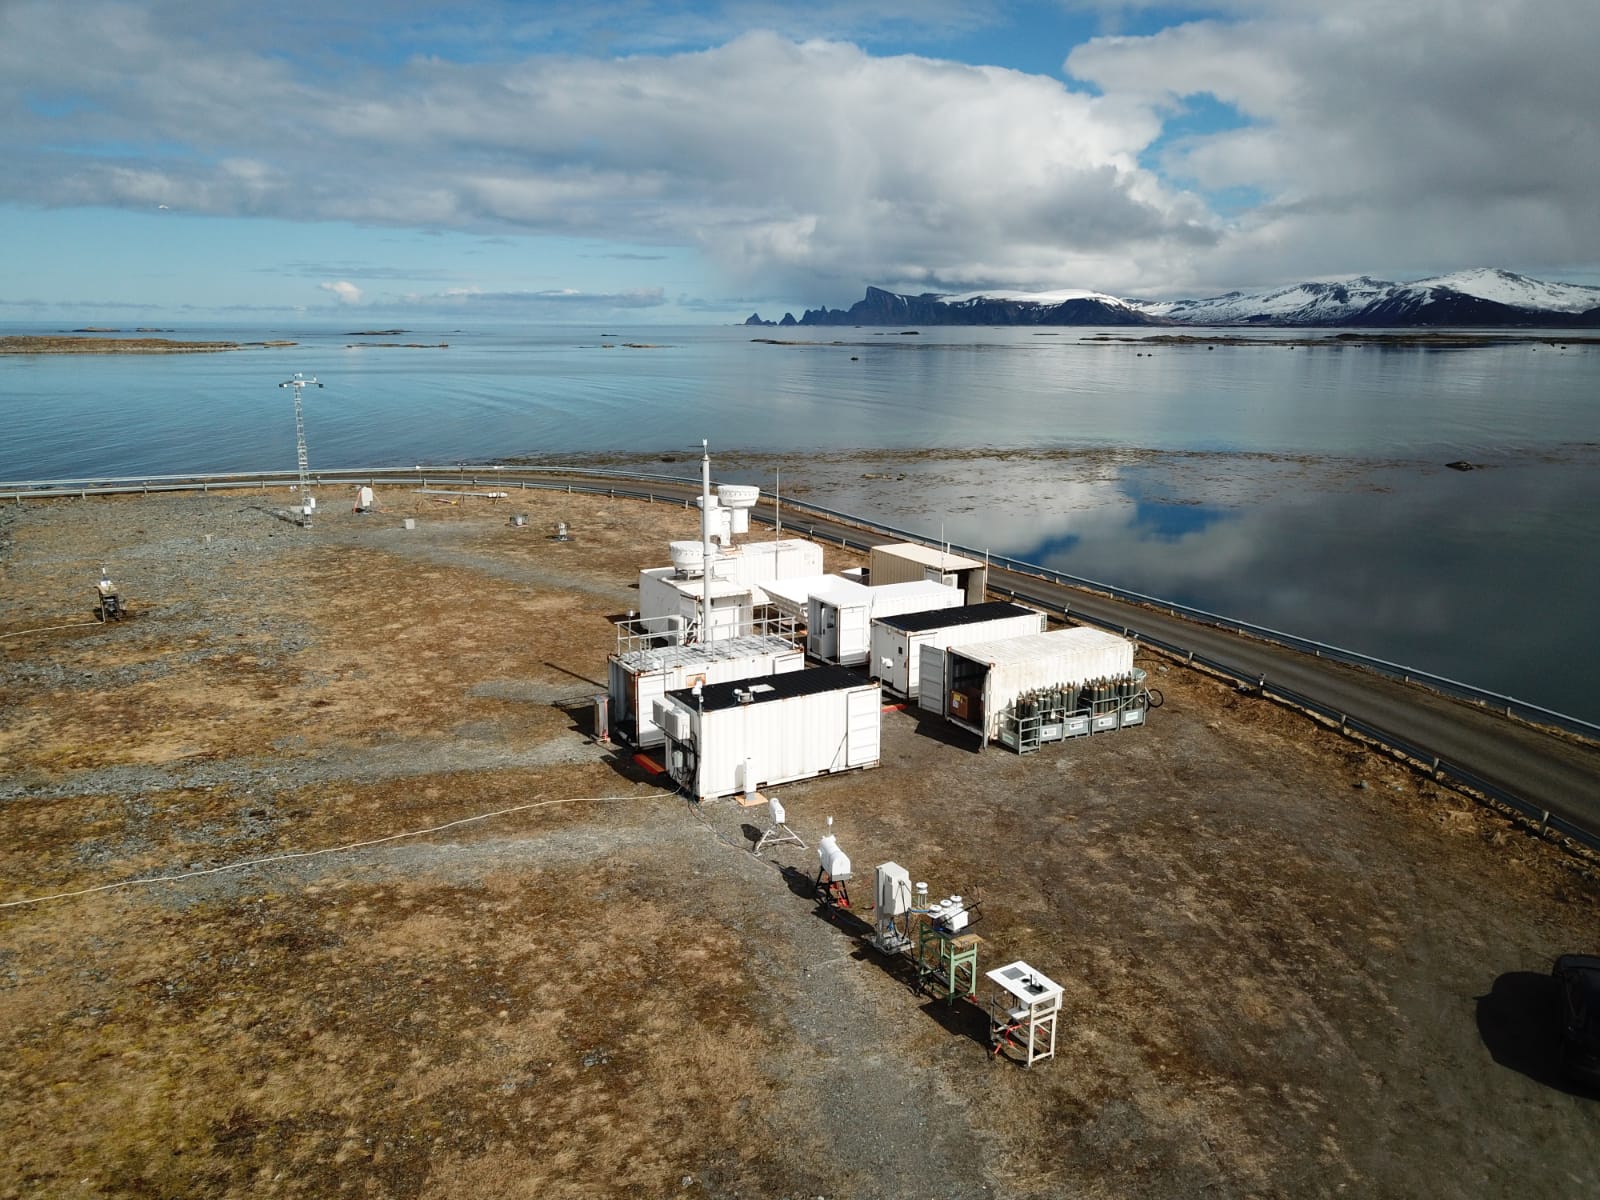 First ARM Mobile Facility (AMF1) sited on Norwegian Sea for COMBLE field campaign